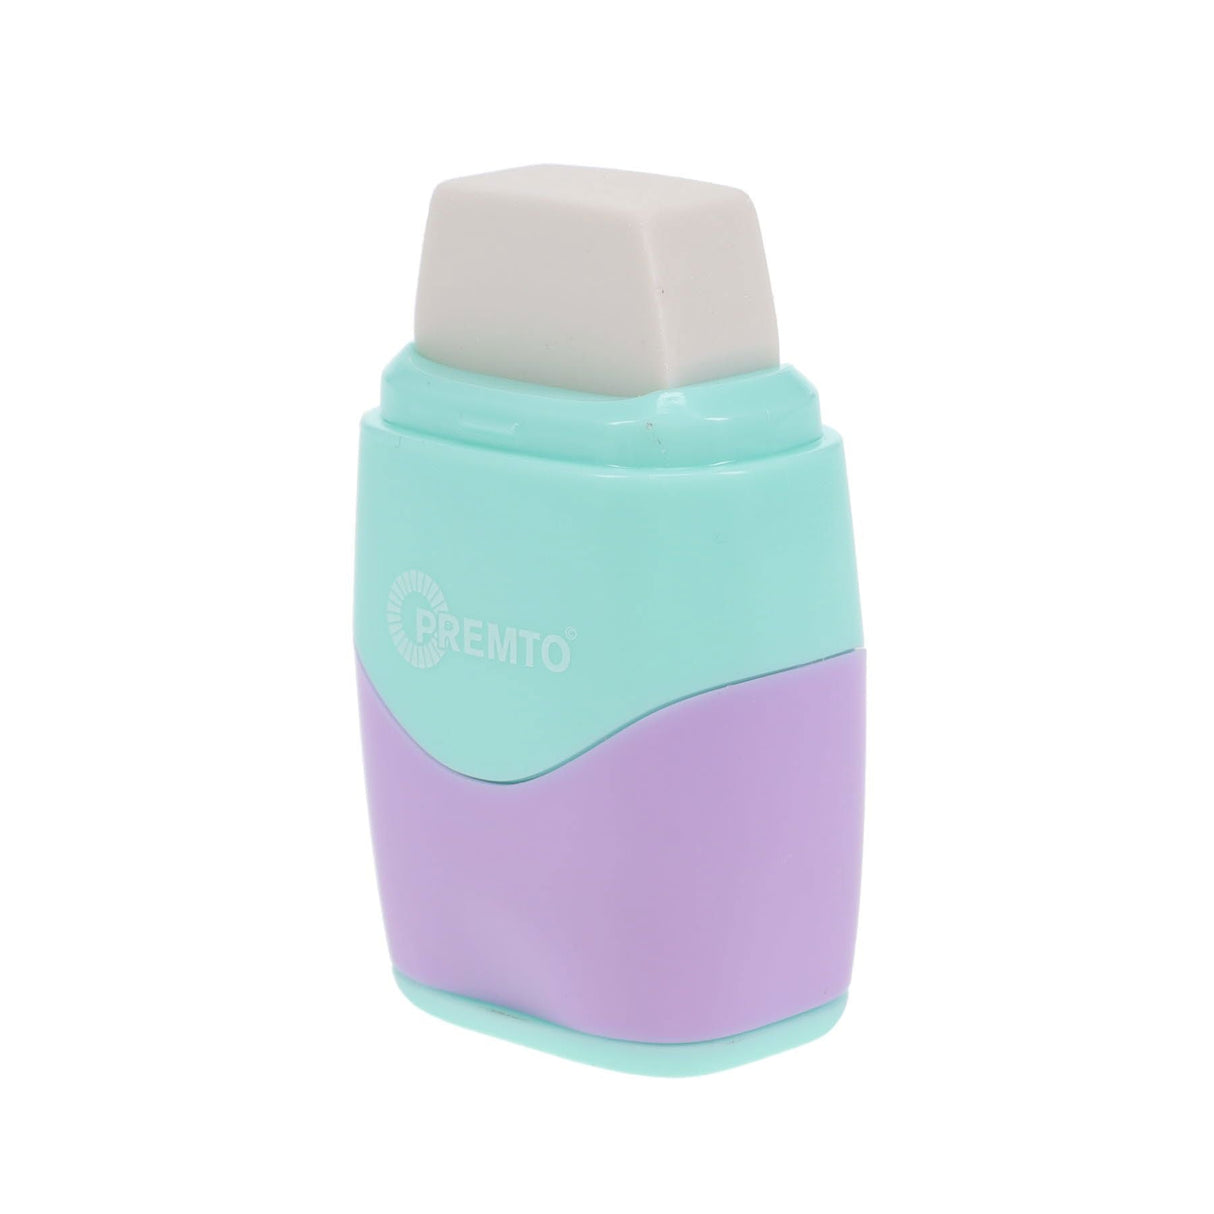 Premto Pastel Twin Hole Sharpener with Eraser - Mint Magic and Wild Orchid | Stationery Shop UK